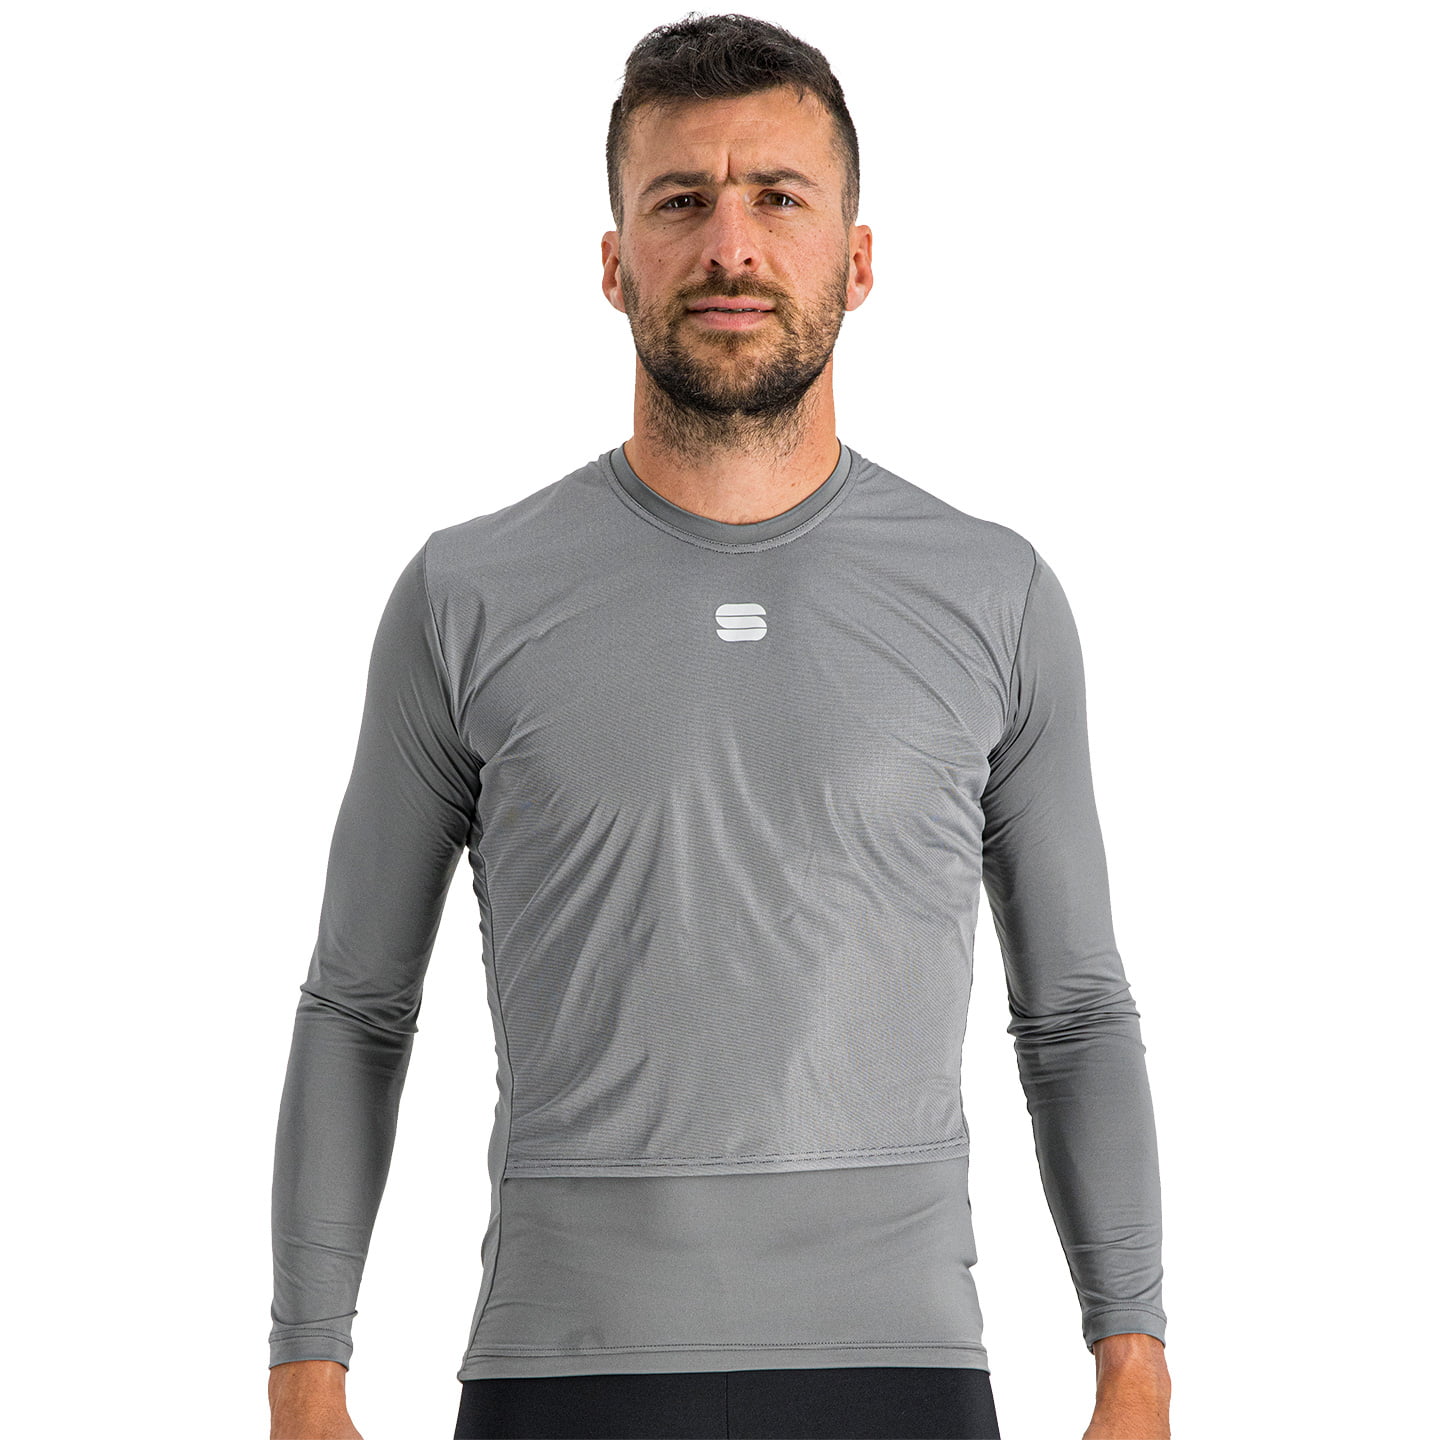 Sportful Fiandre Thermal Long Sleeve Cycling Base Layer Base Layer, for men, size M, Singlet, Cycling clothing